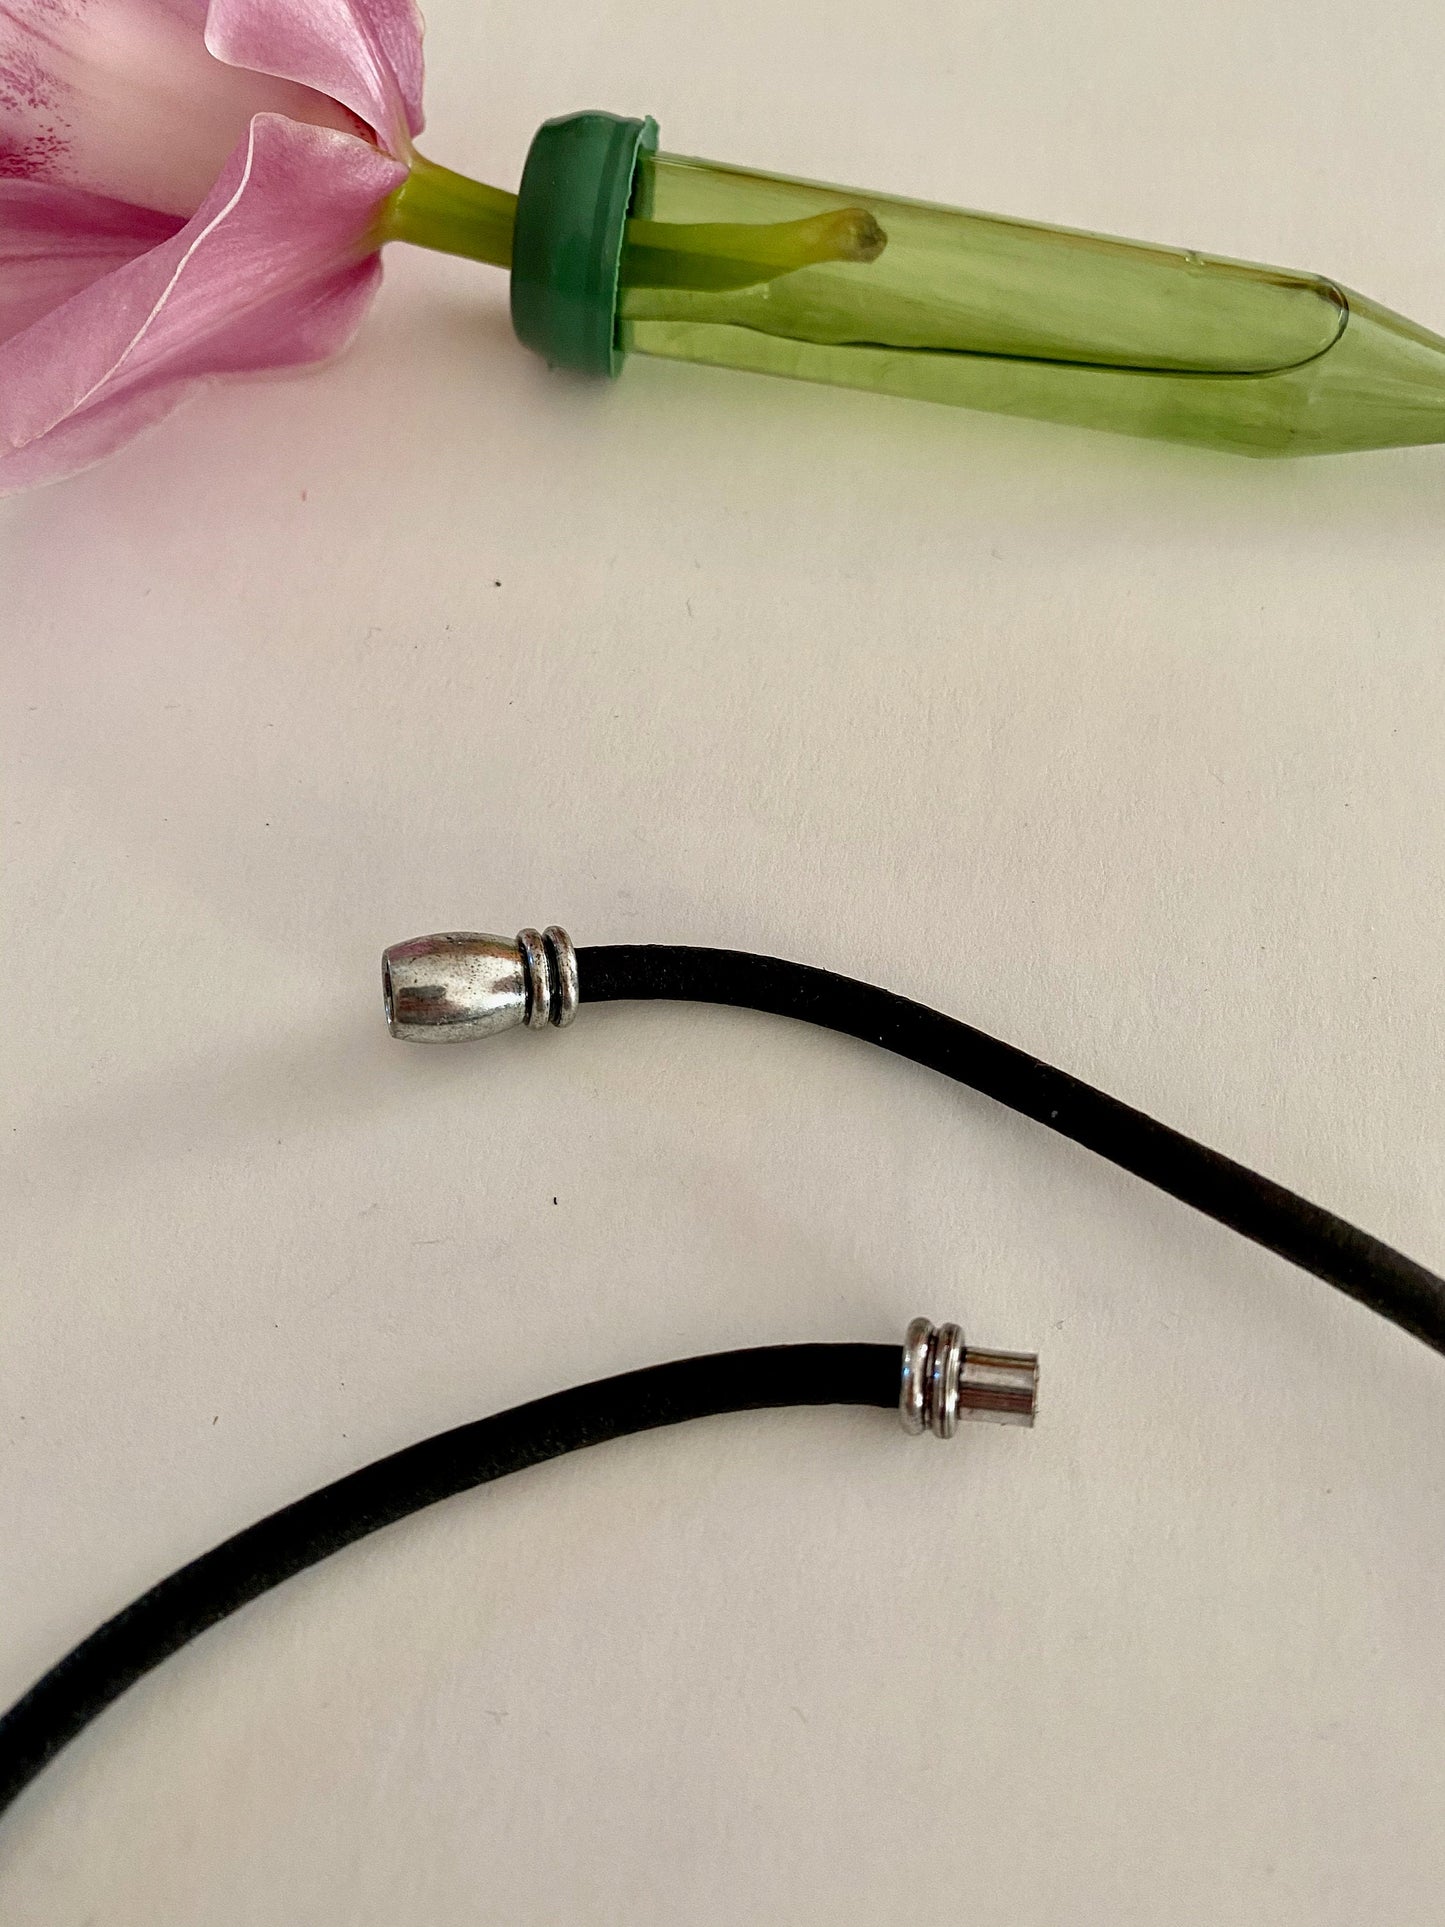 Leather Necklace. Beautiful black Italian leather choker necklace with three silver curved ornate tubes and accented with a magnetic silver clasp.